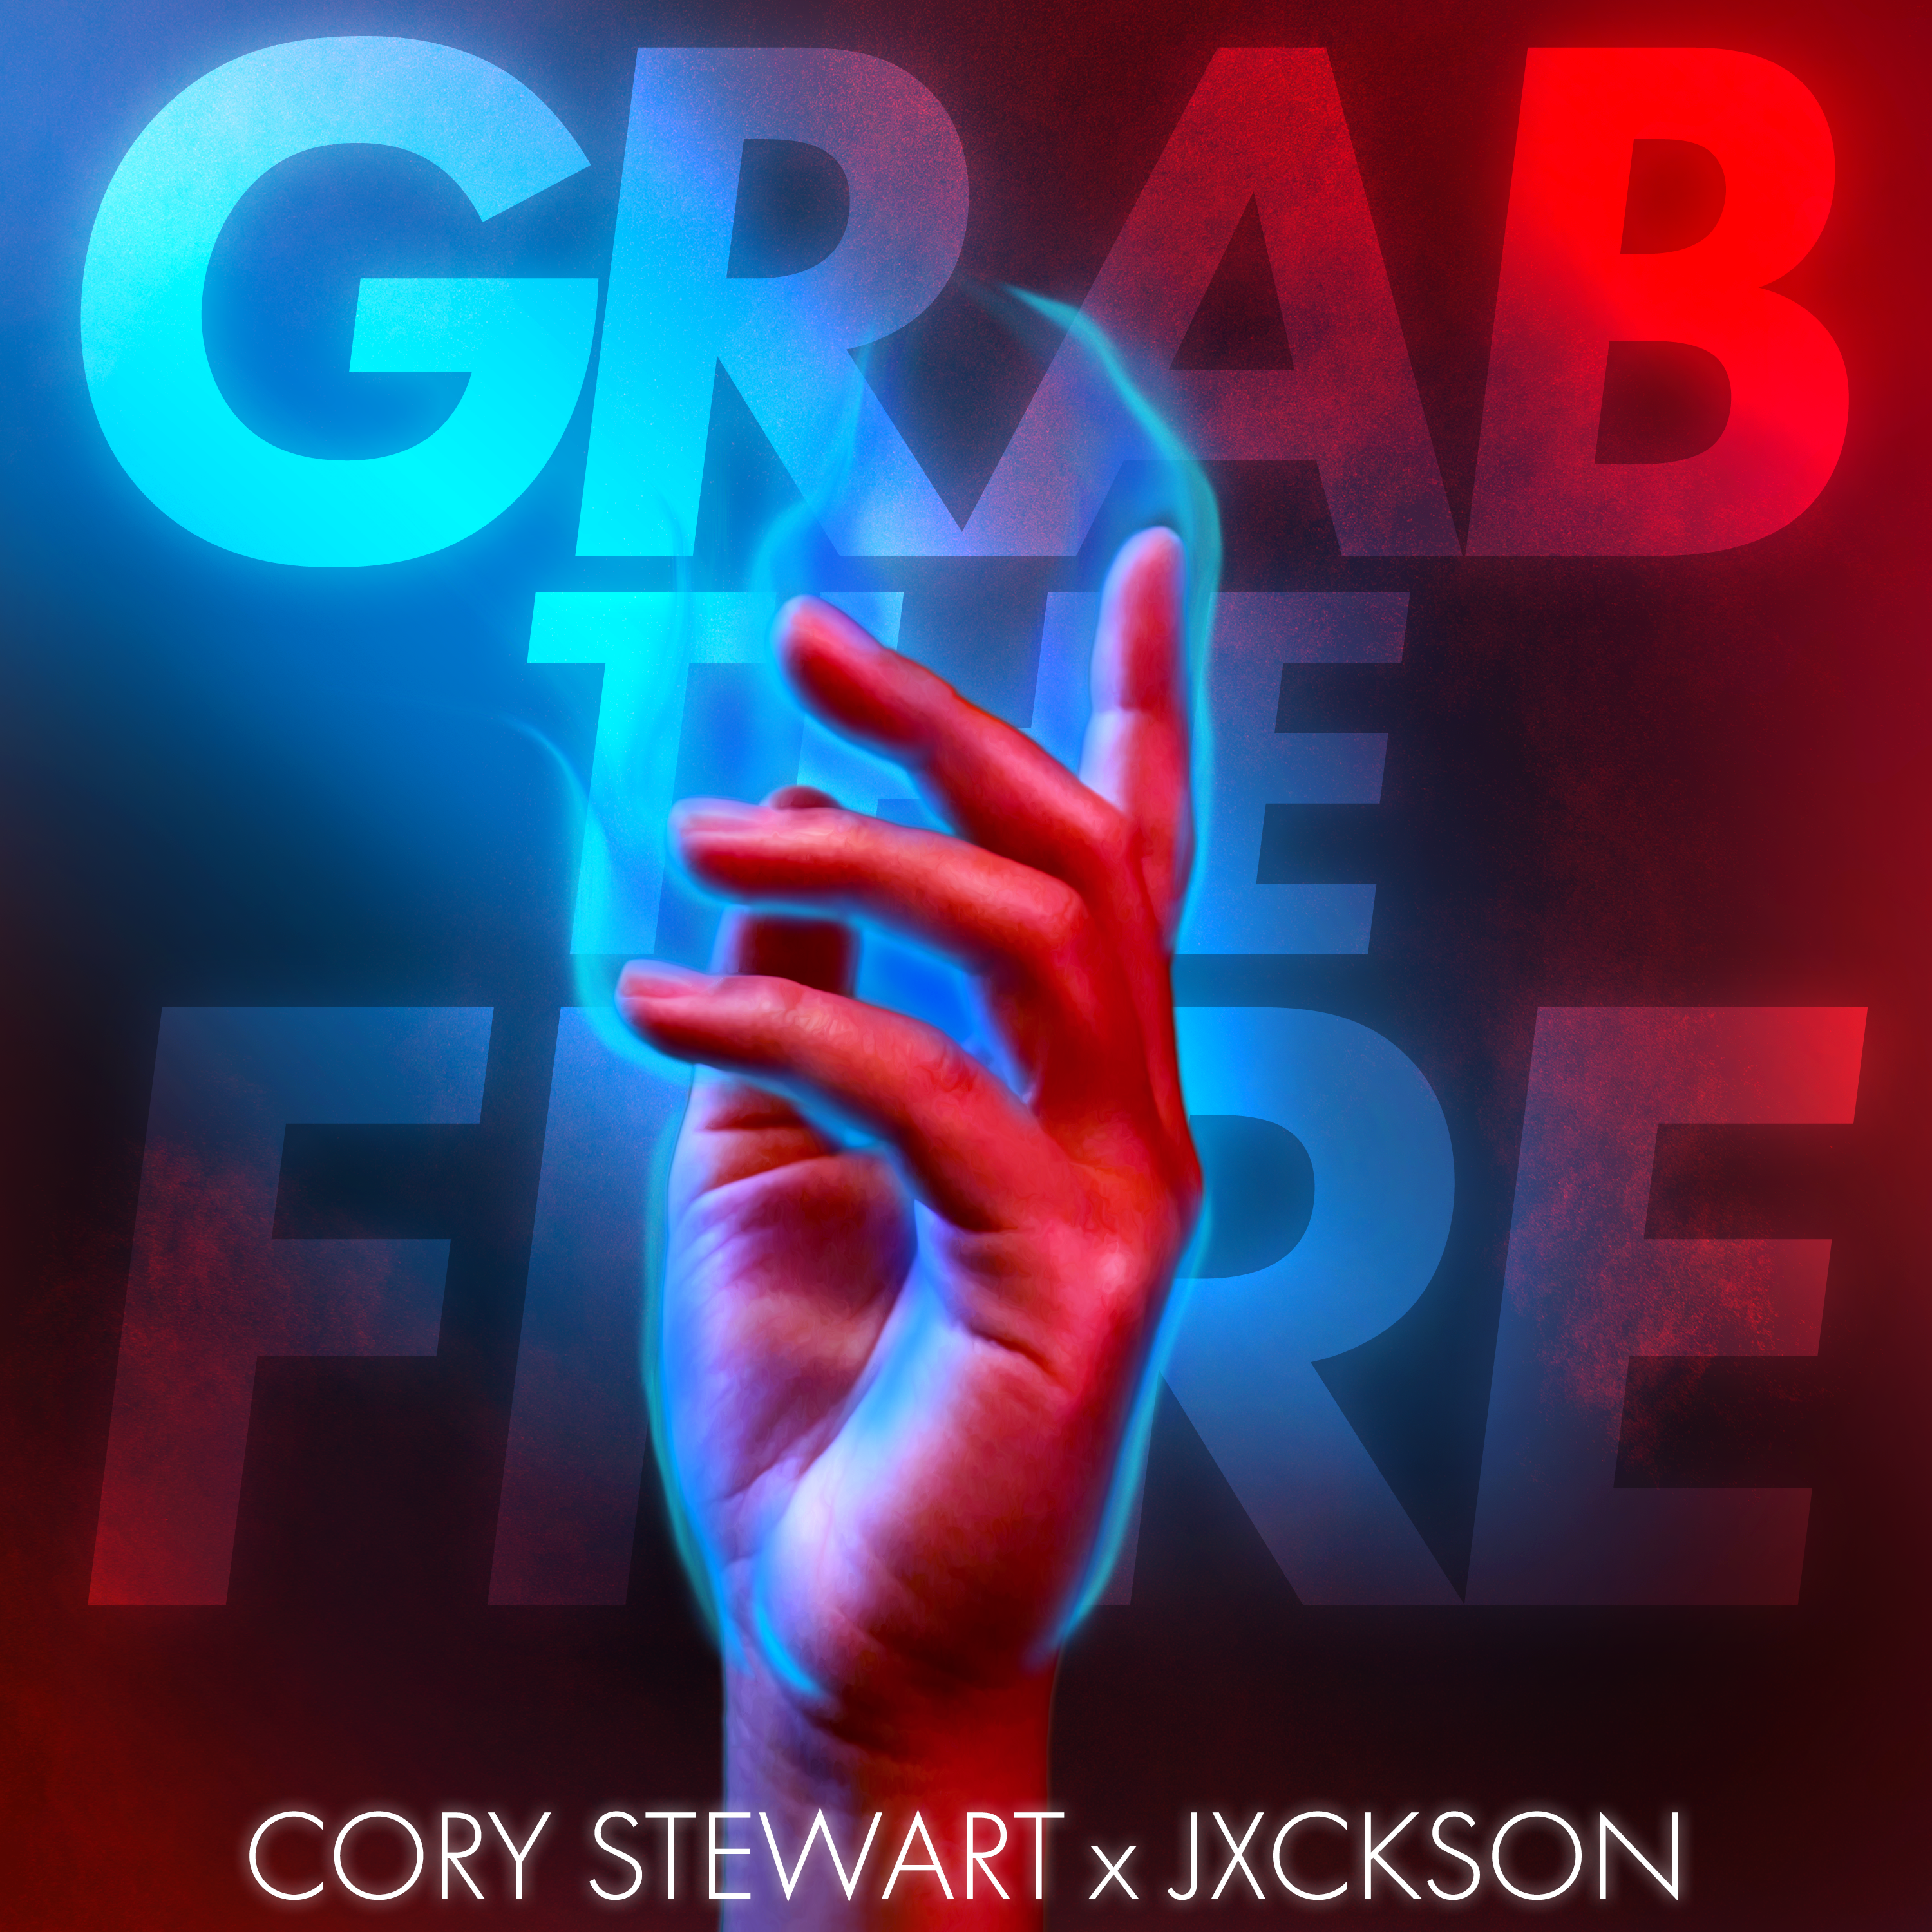 Turning Up The Temperature With Cory Stewart And Jxckson’s Grab The Fire